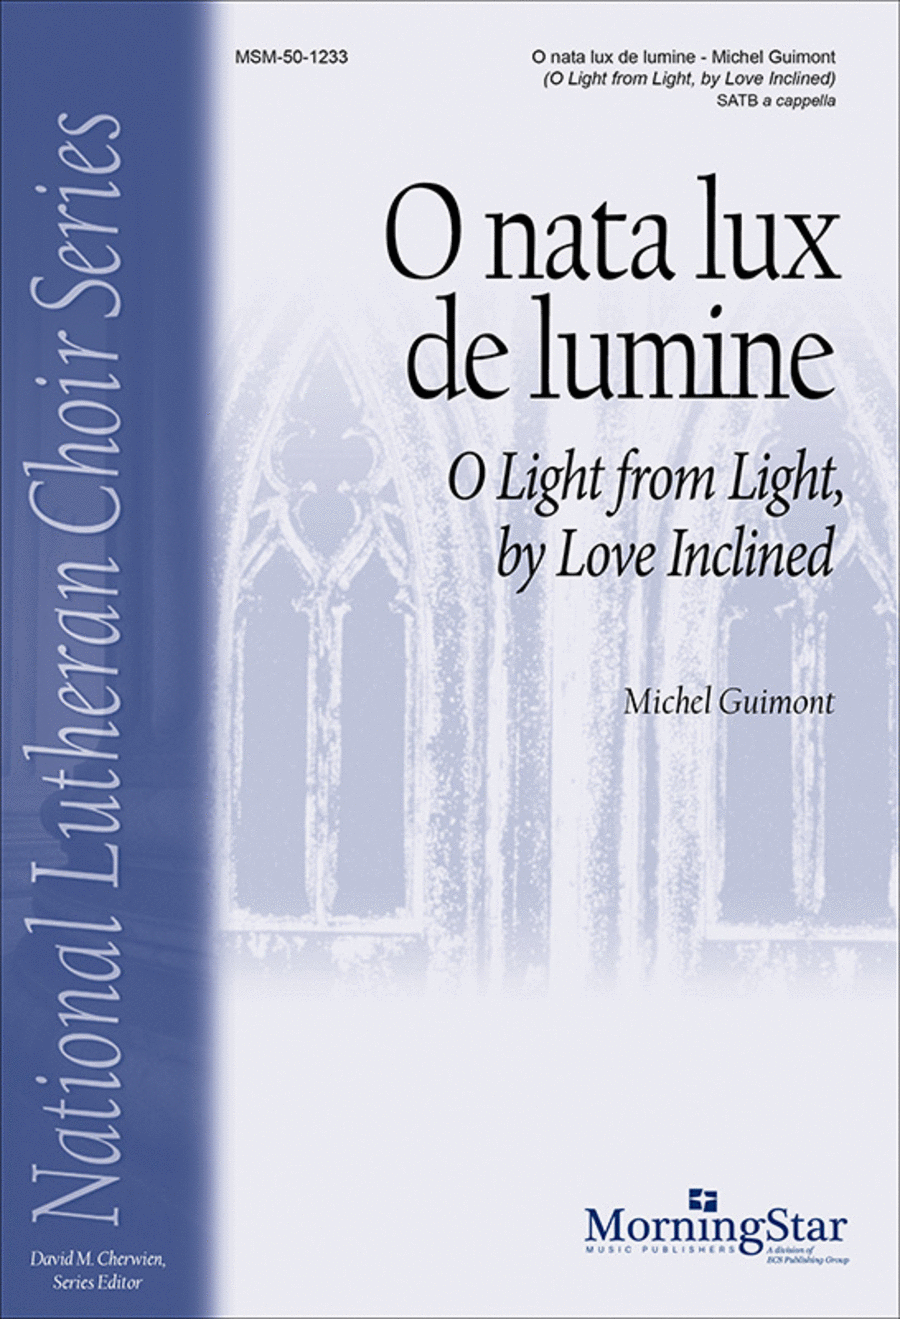 O nata lux de lumine: O Light from Light, by Love Inclined